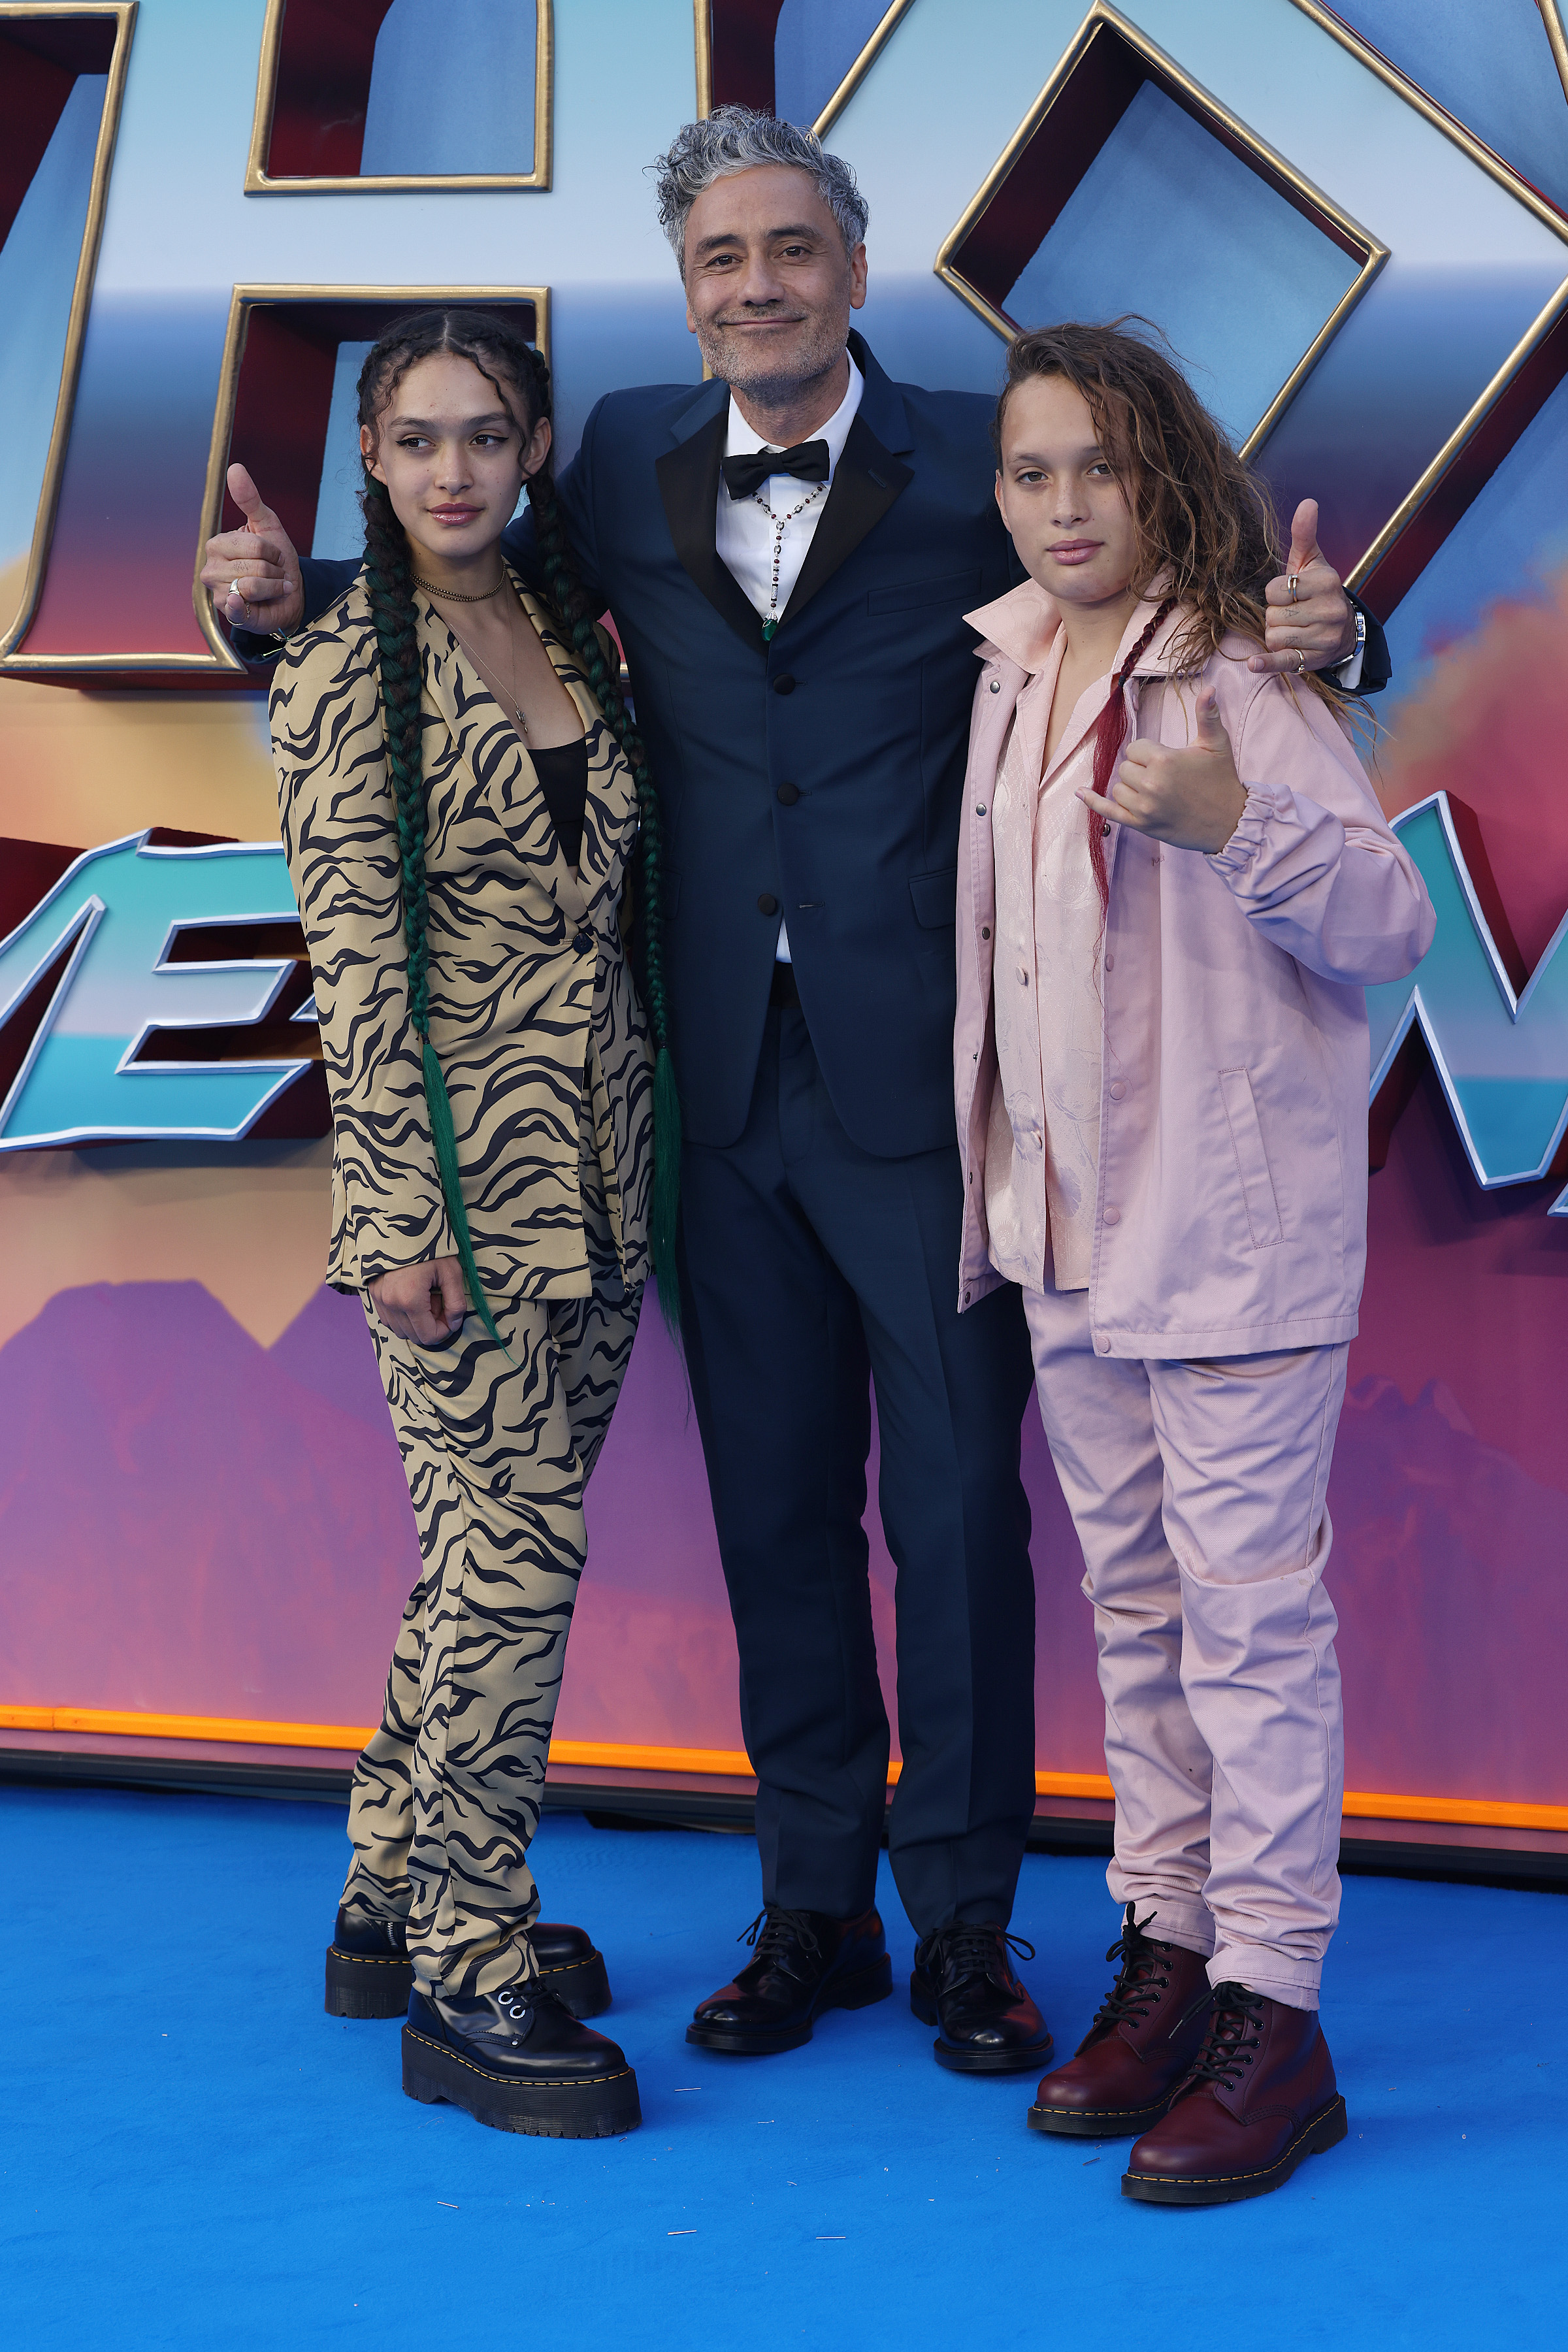 Taika Waititi with Jason Momoa's children, Lola and Nakoa-Wolf Momoa attend the screening of "Thor: Love and Thunder" on July 05, 2022 in London, England | Source: Getty Images